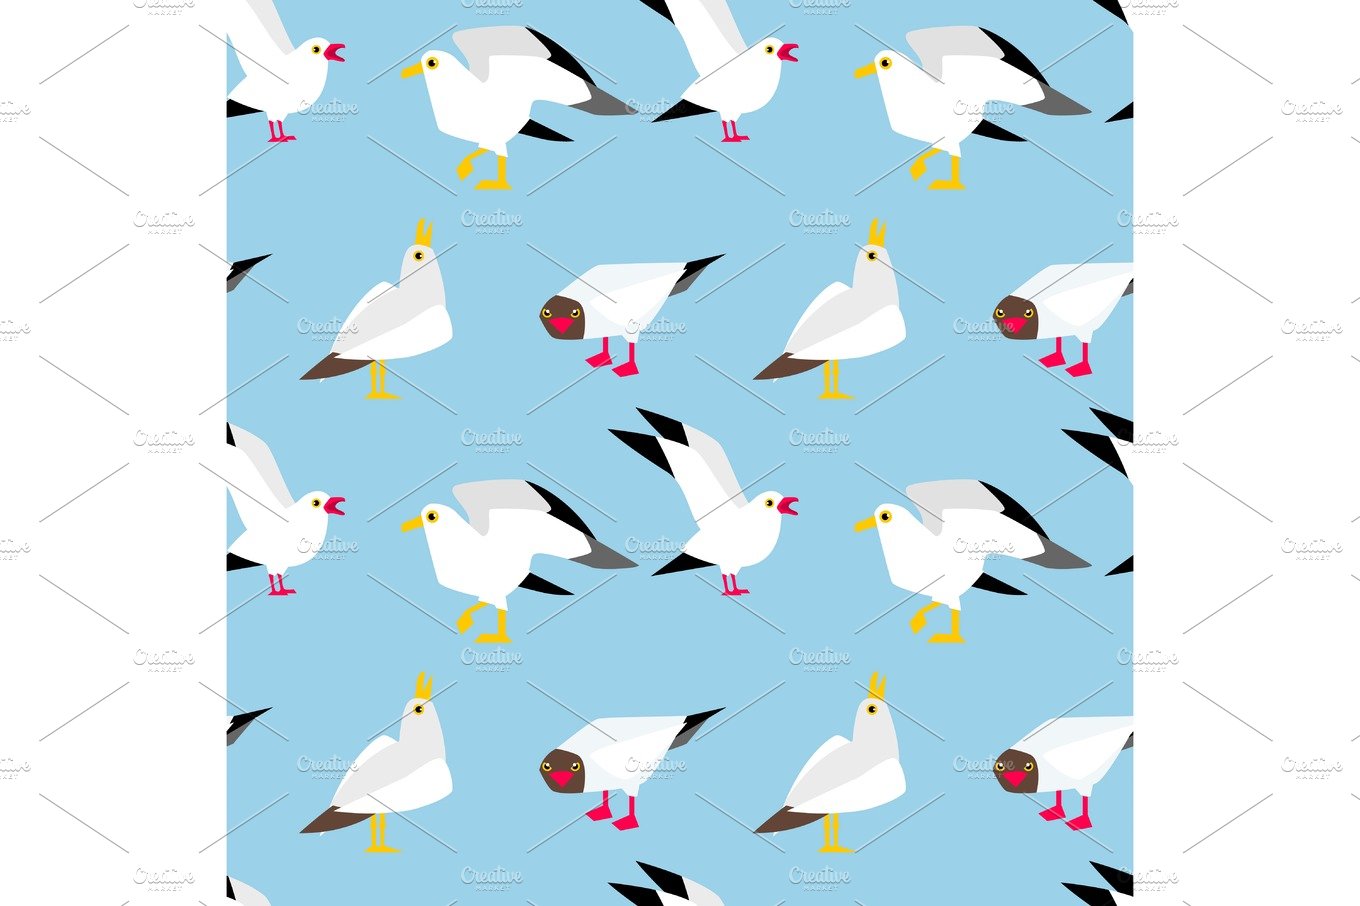 Seagulls flying in the sky. cover image.